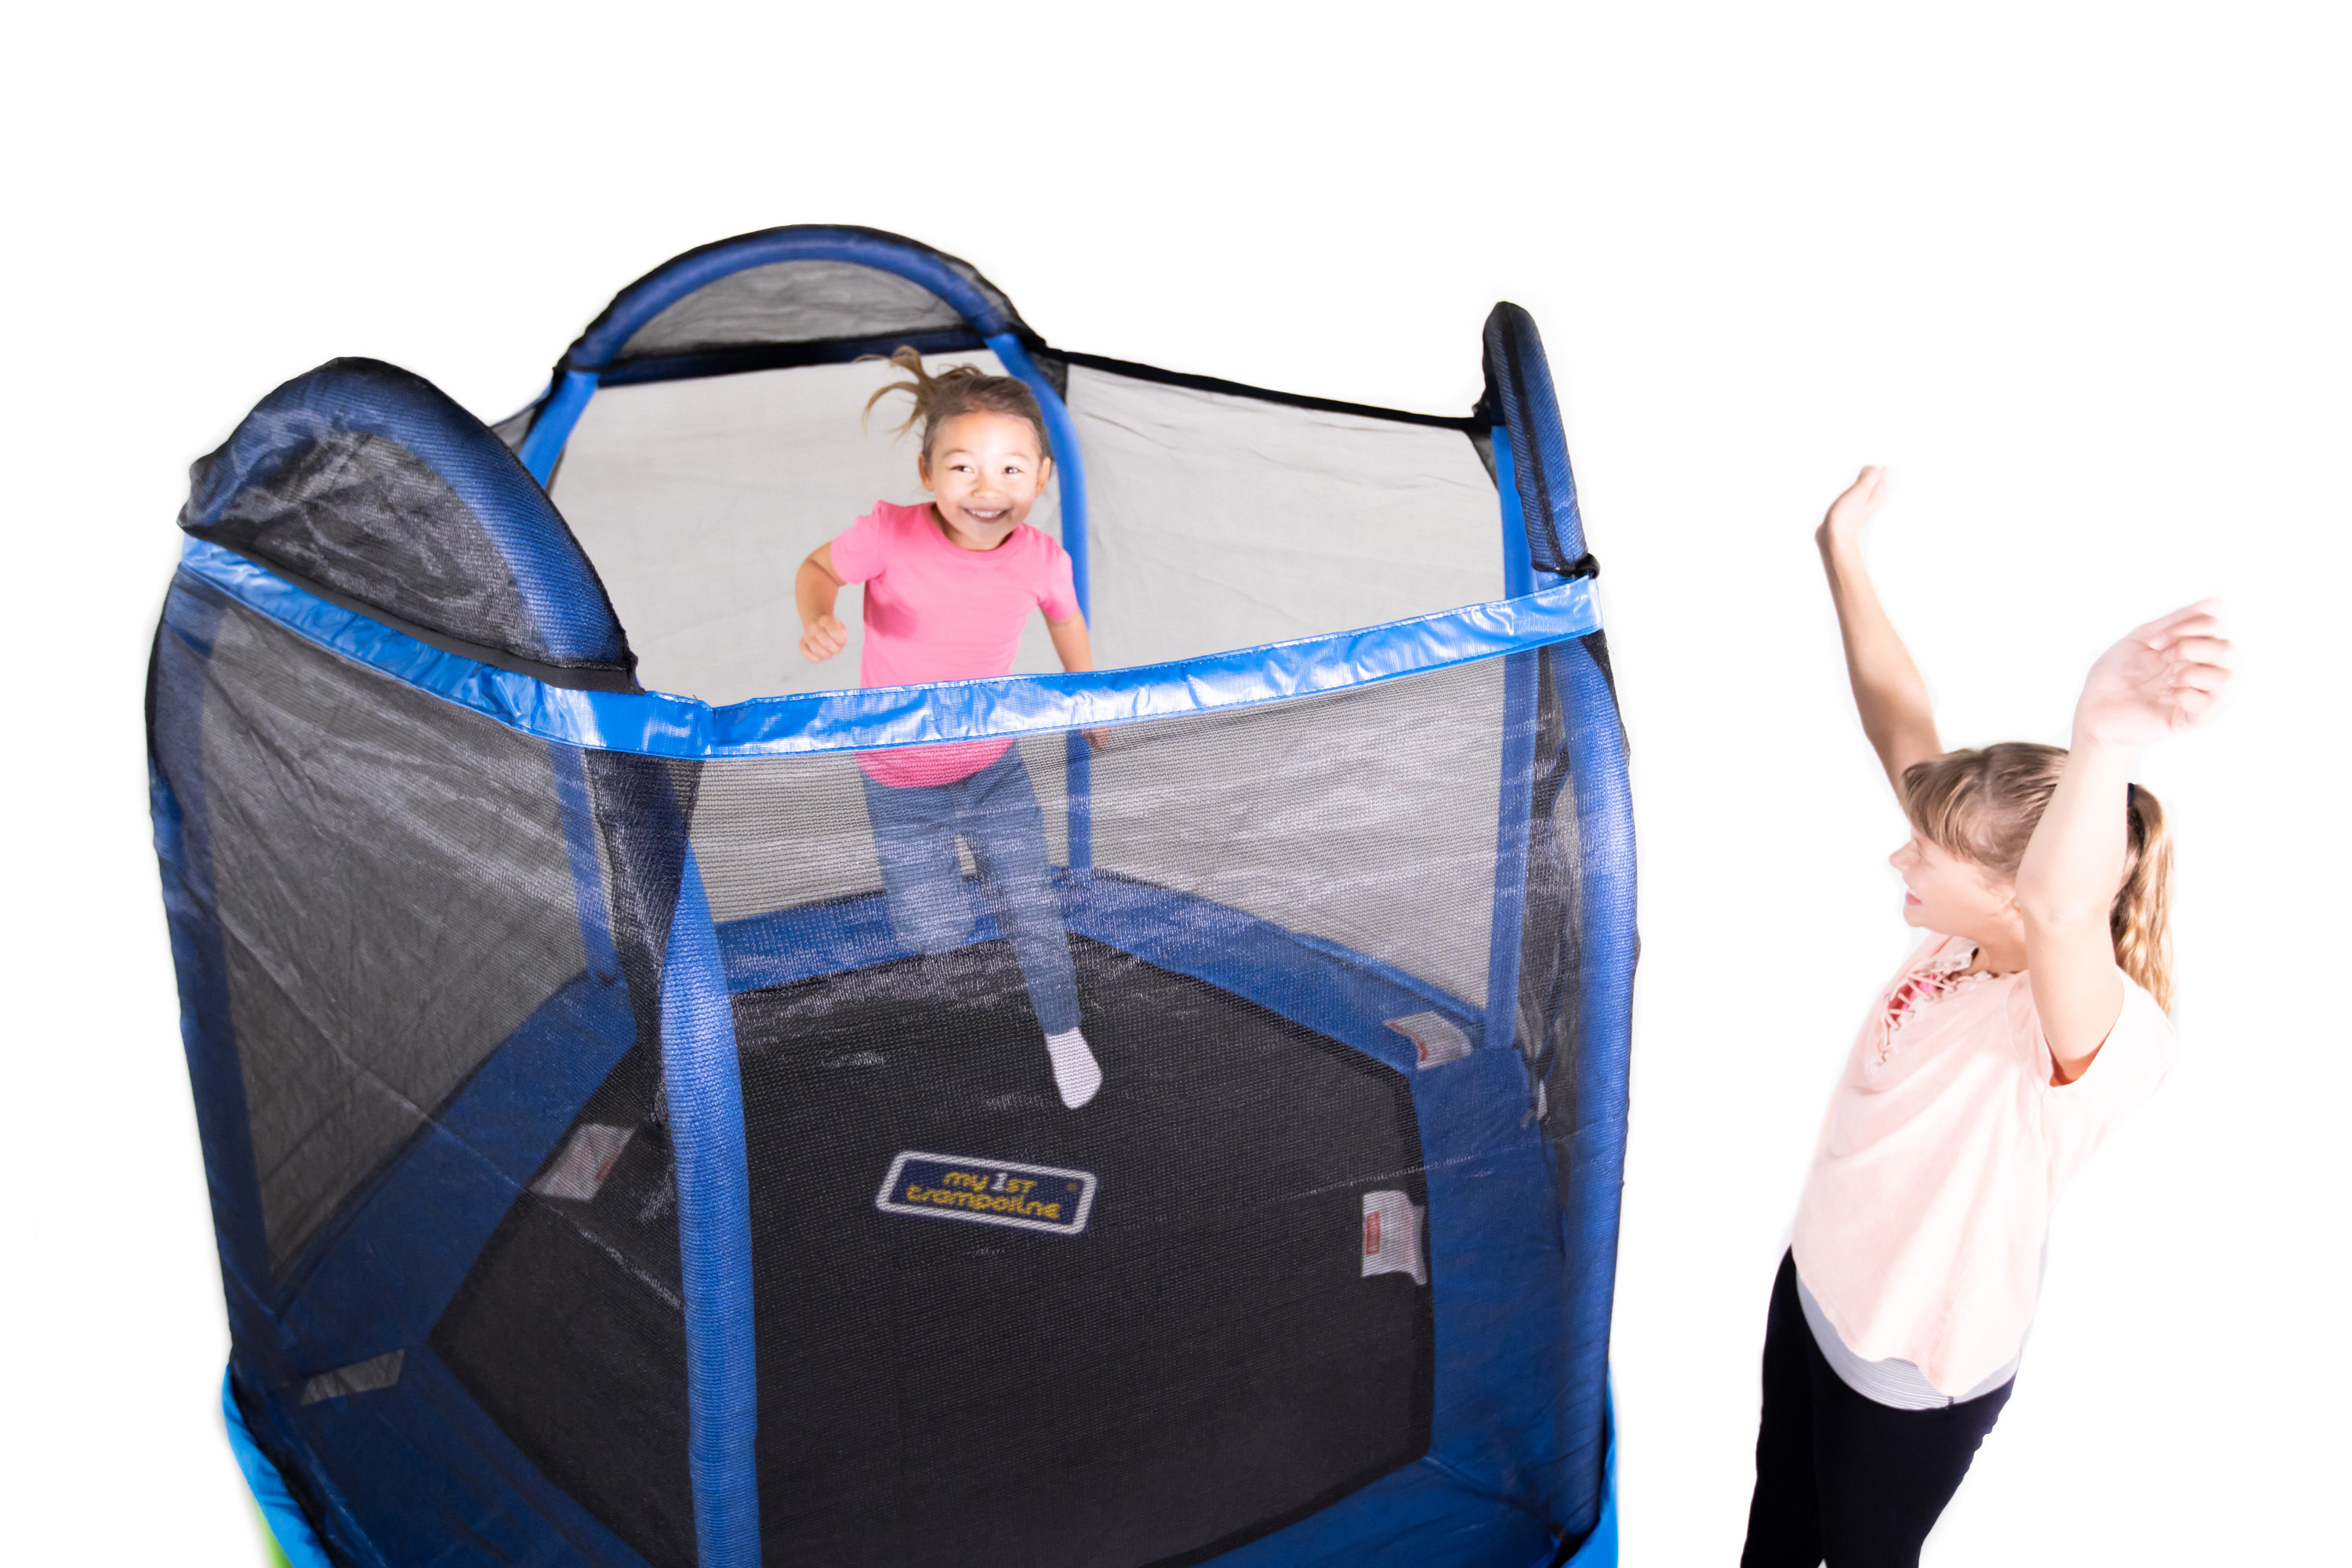 Bounce Pro 7-Foot My First Trampoline Hexagon (Ages 3-10) for Kids, Blue/Green - image 3 of 9